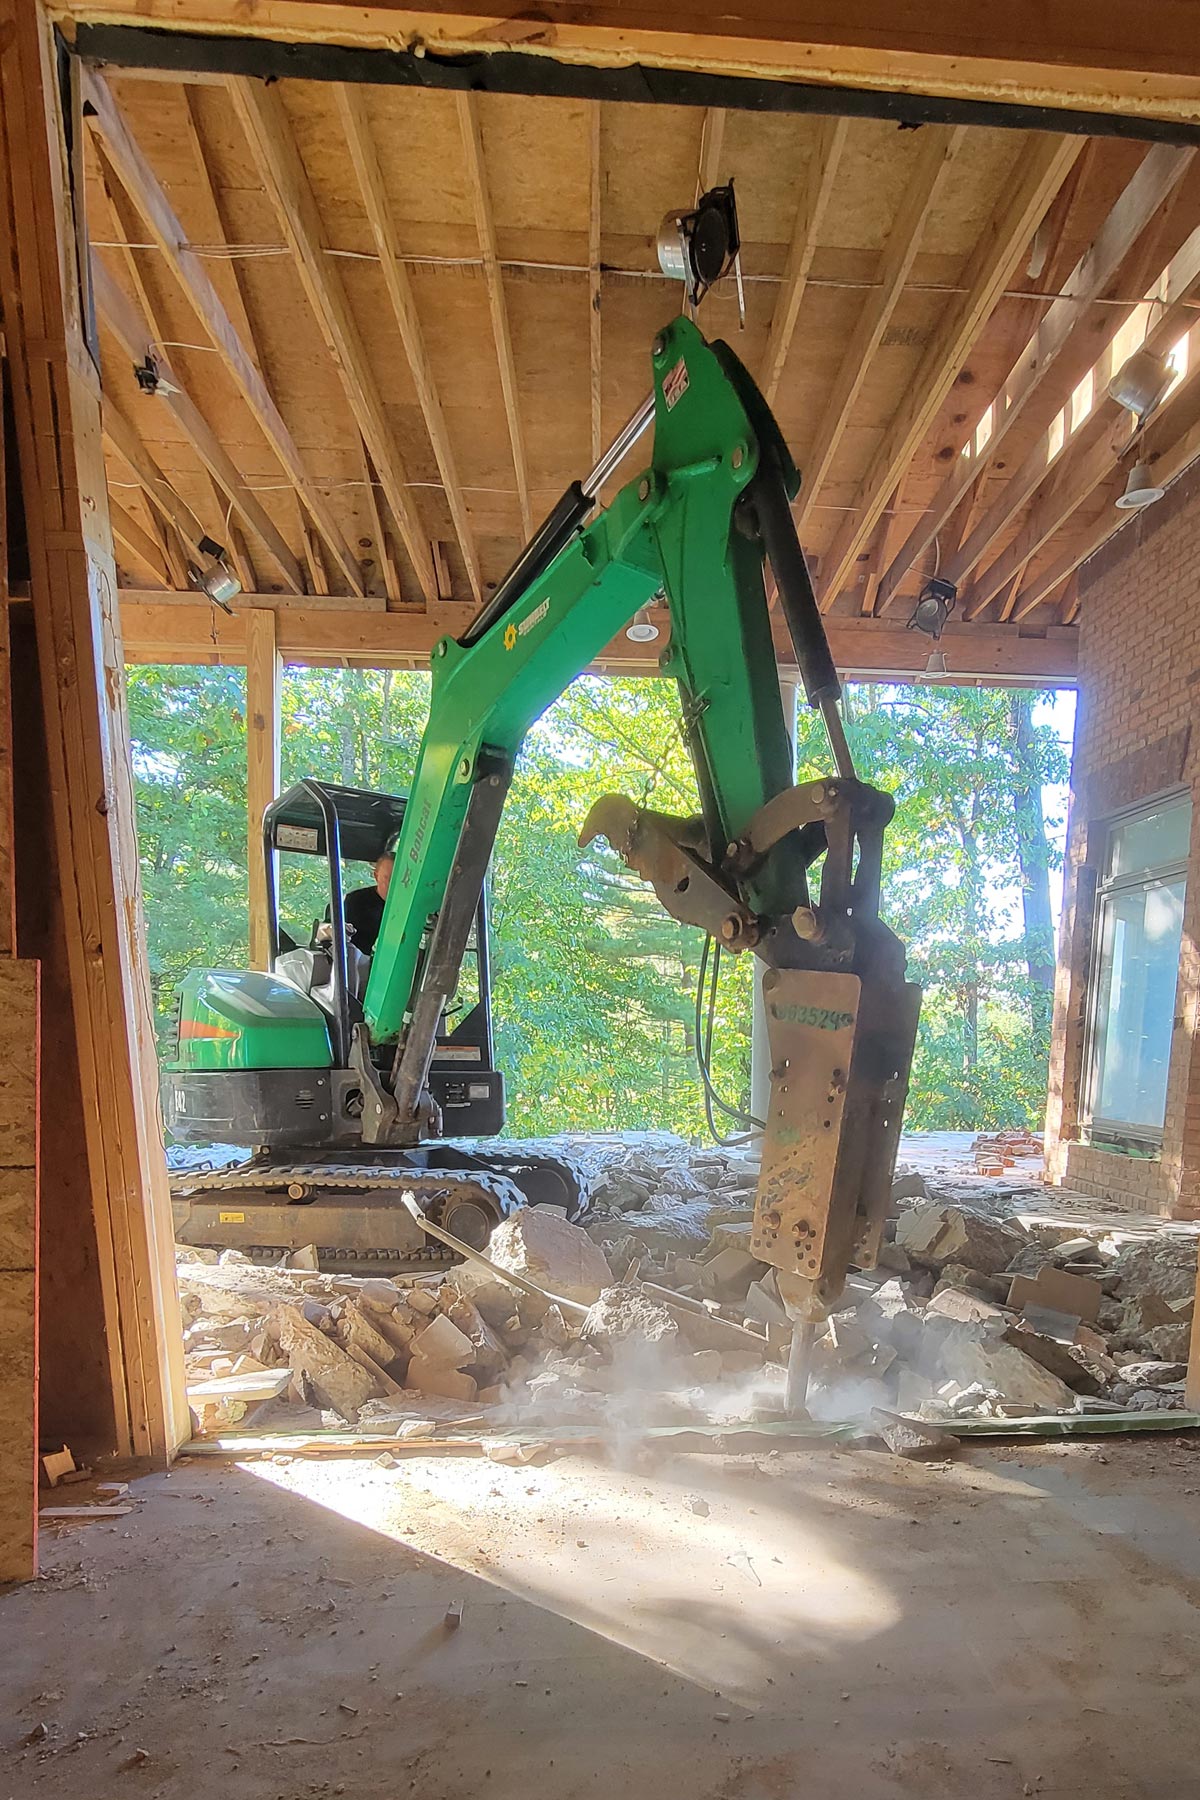 Using the bobcat to jackhammer the old, unstable patio